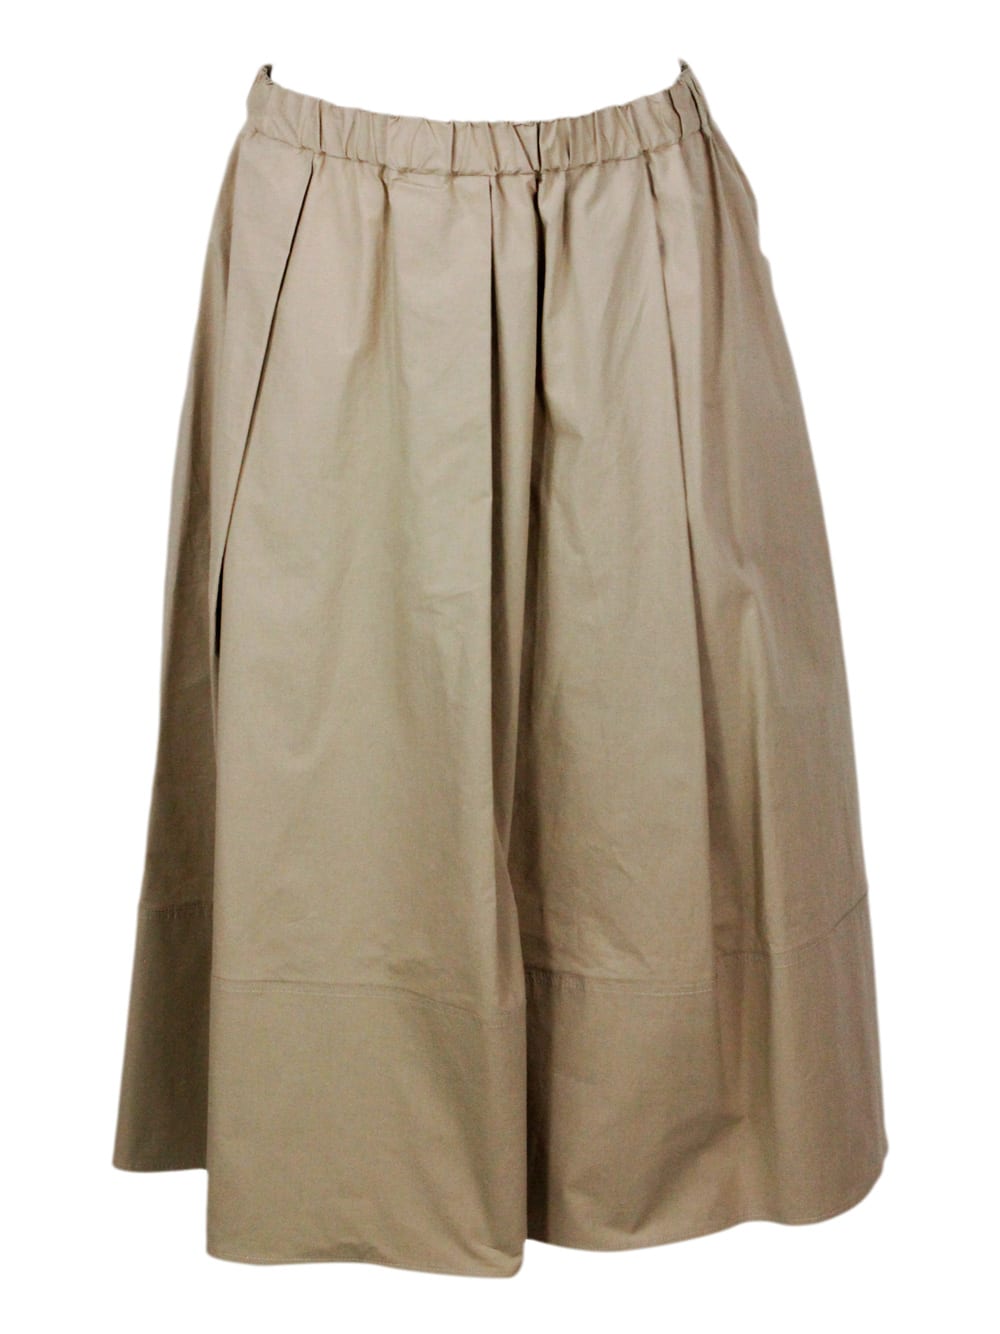 Shop Antonelli Long Skirt With Elastic Waist And Welt Pockets With Pleats Made Of Stretch Cotton In Beige